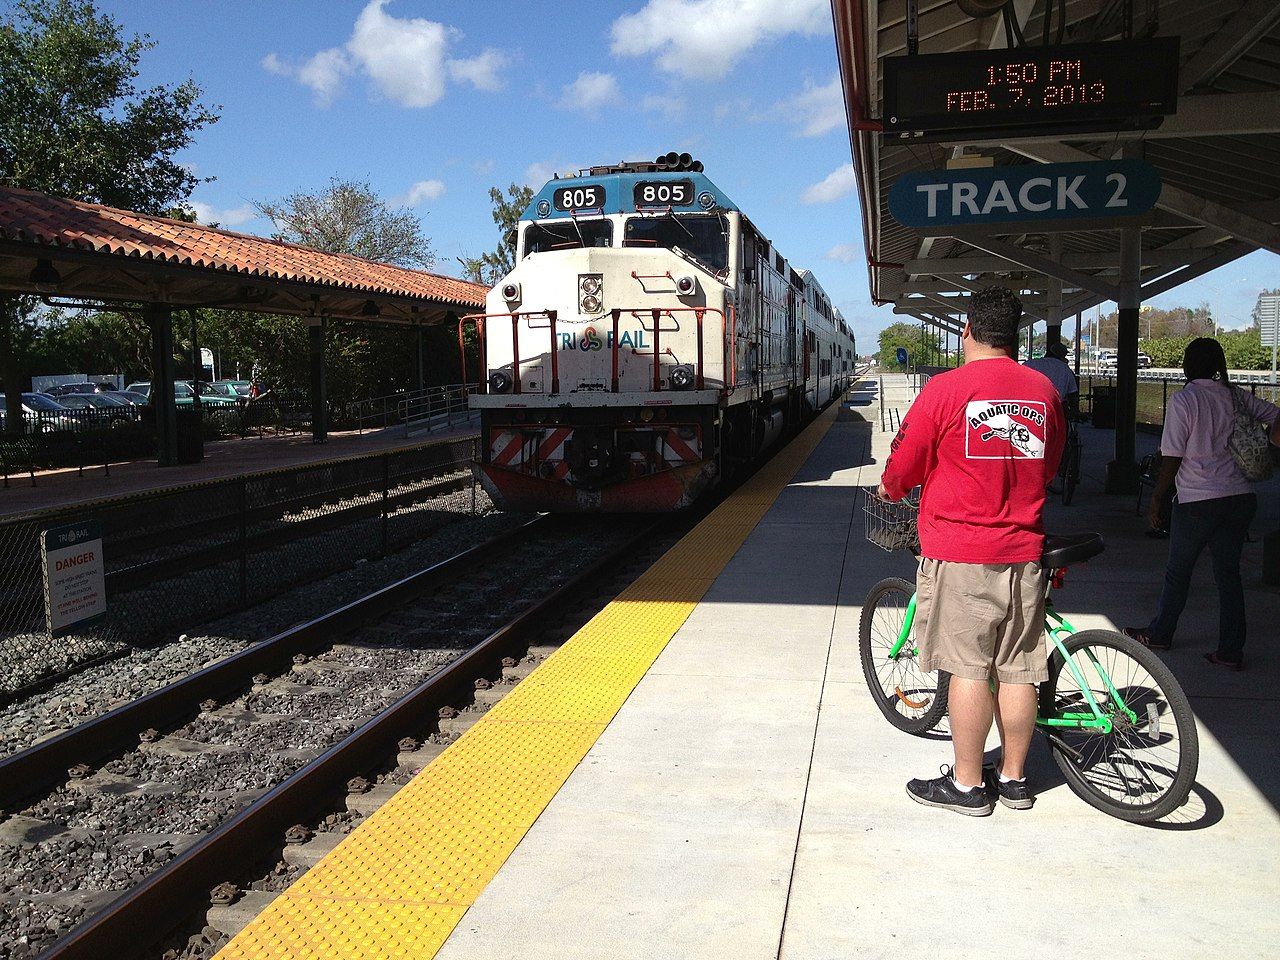 An Amtrak train nearing a stop on a sunny day with a man holding his bike at the platform